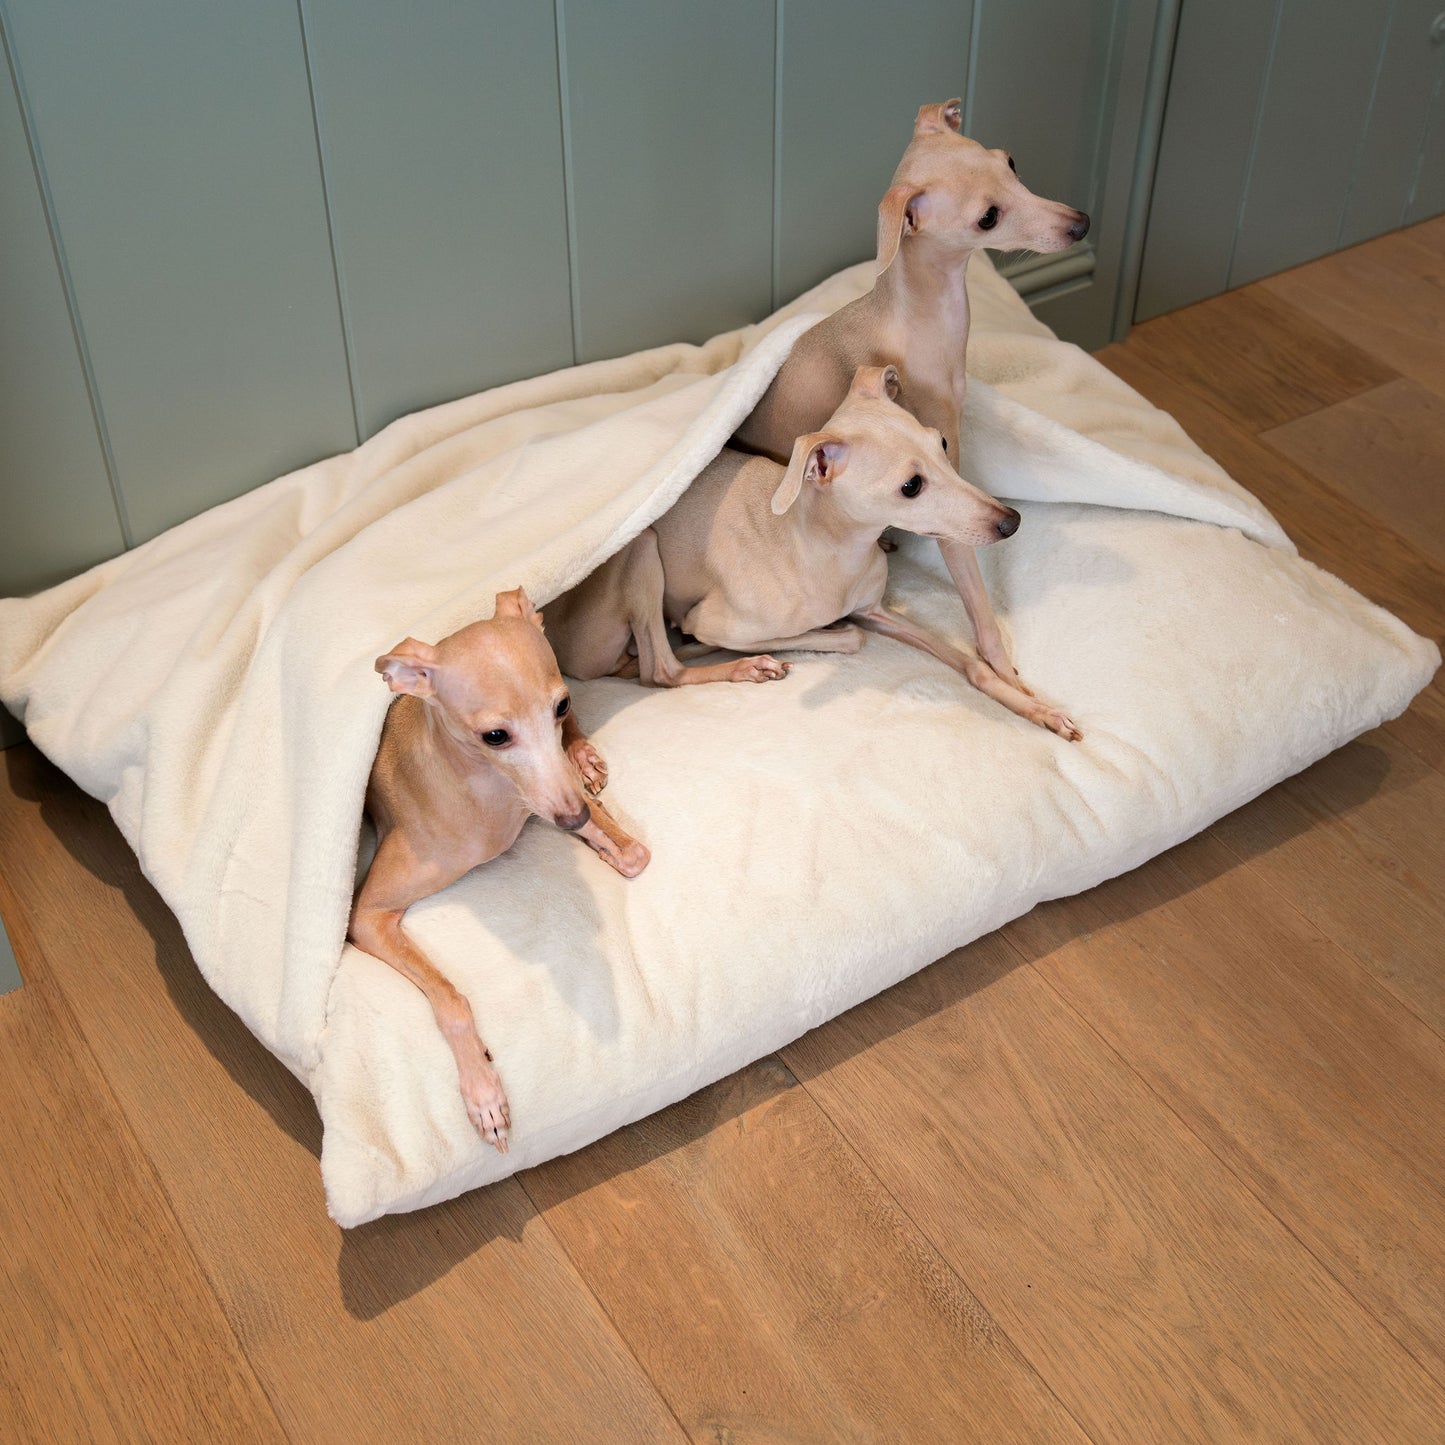 Discover The Perfect Burrow For Your Pet, Our Stunning Sleepy Burrow Dog Beds In Calming Anti Anxiety Cream Faux Fur, Is The Perfect Bed Choice For Your Pet, Available Now at Lords & Labradors 